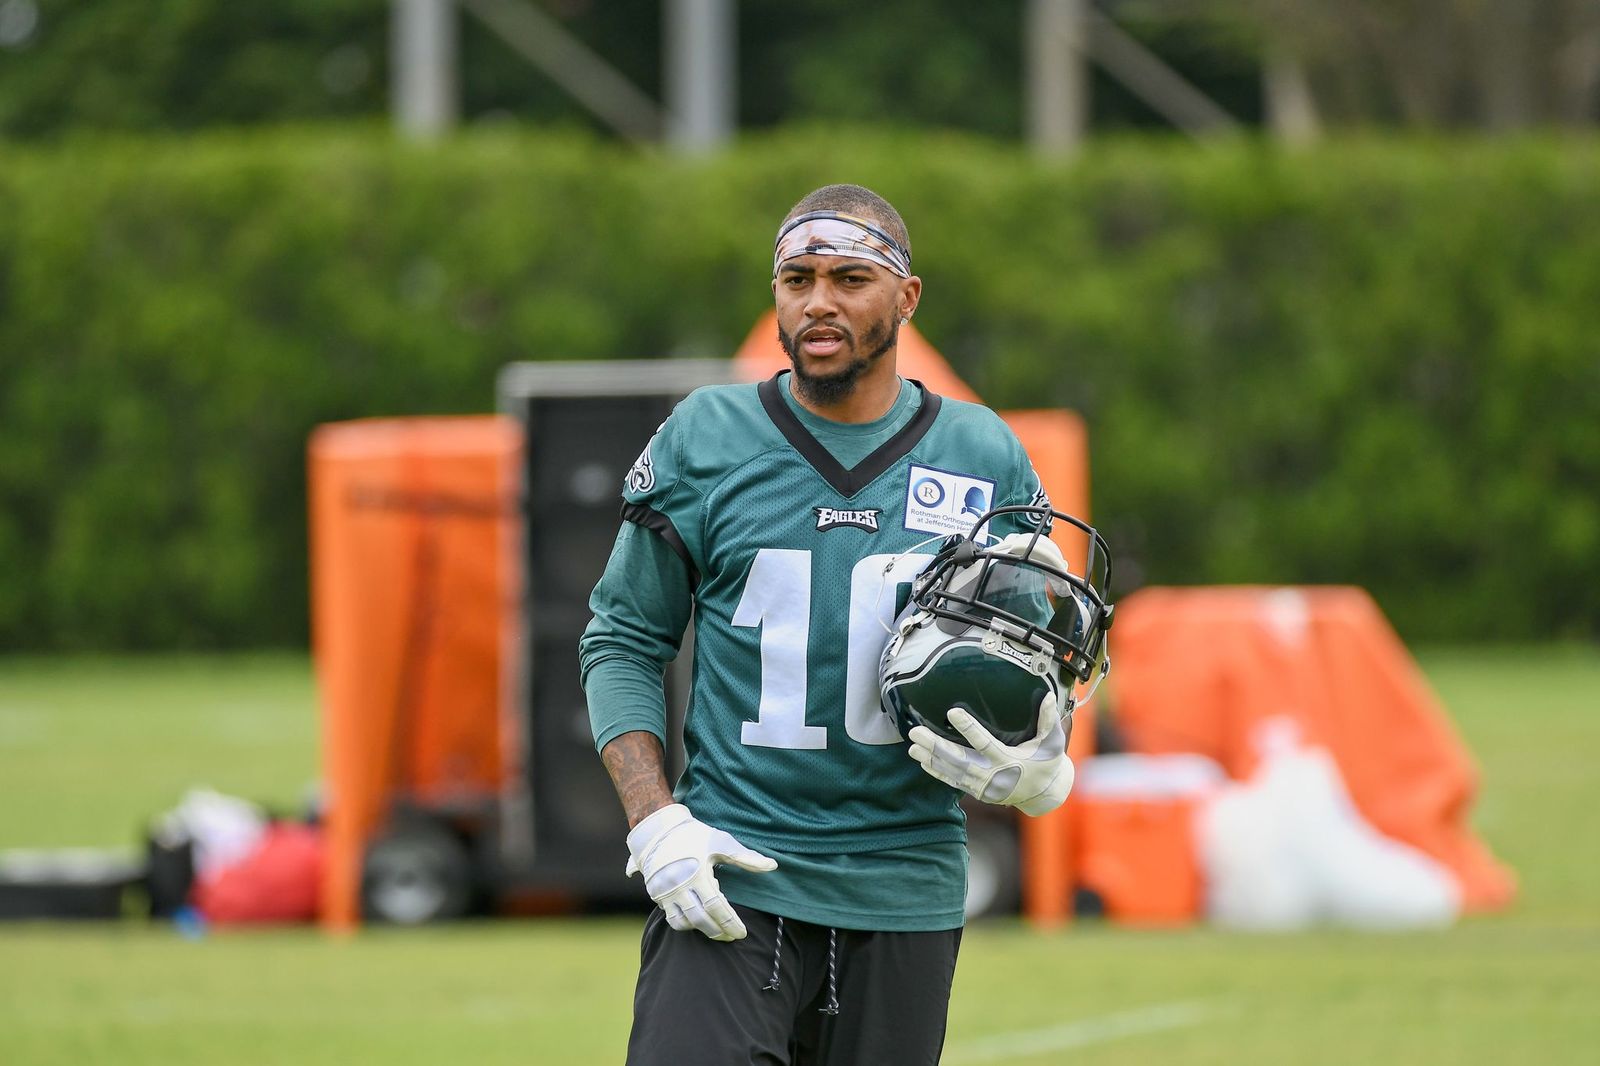 DeSean Jackson at the Eagles OTA in May 2019 in Philadelphia | Source: Getty Images